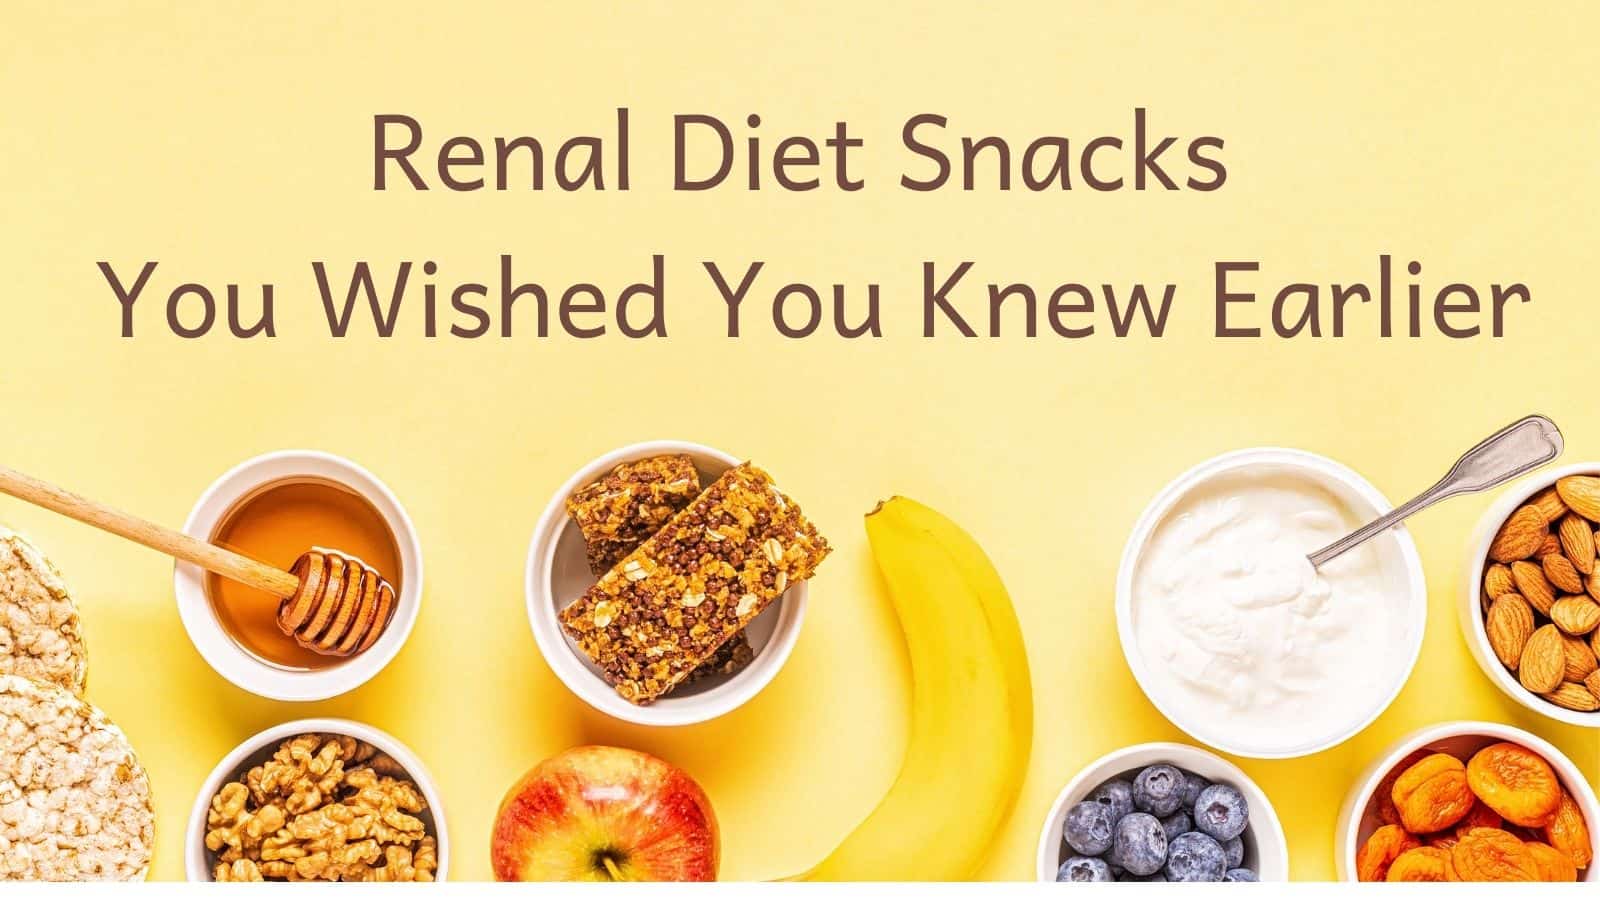 Renal Diet Snacks You Wished You Knew Earlier - The Kidney Dietitian